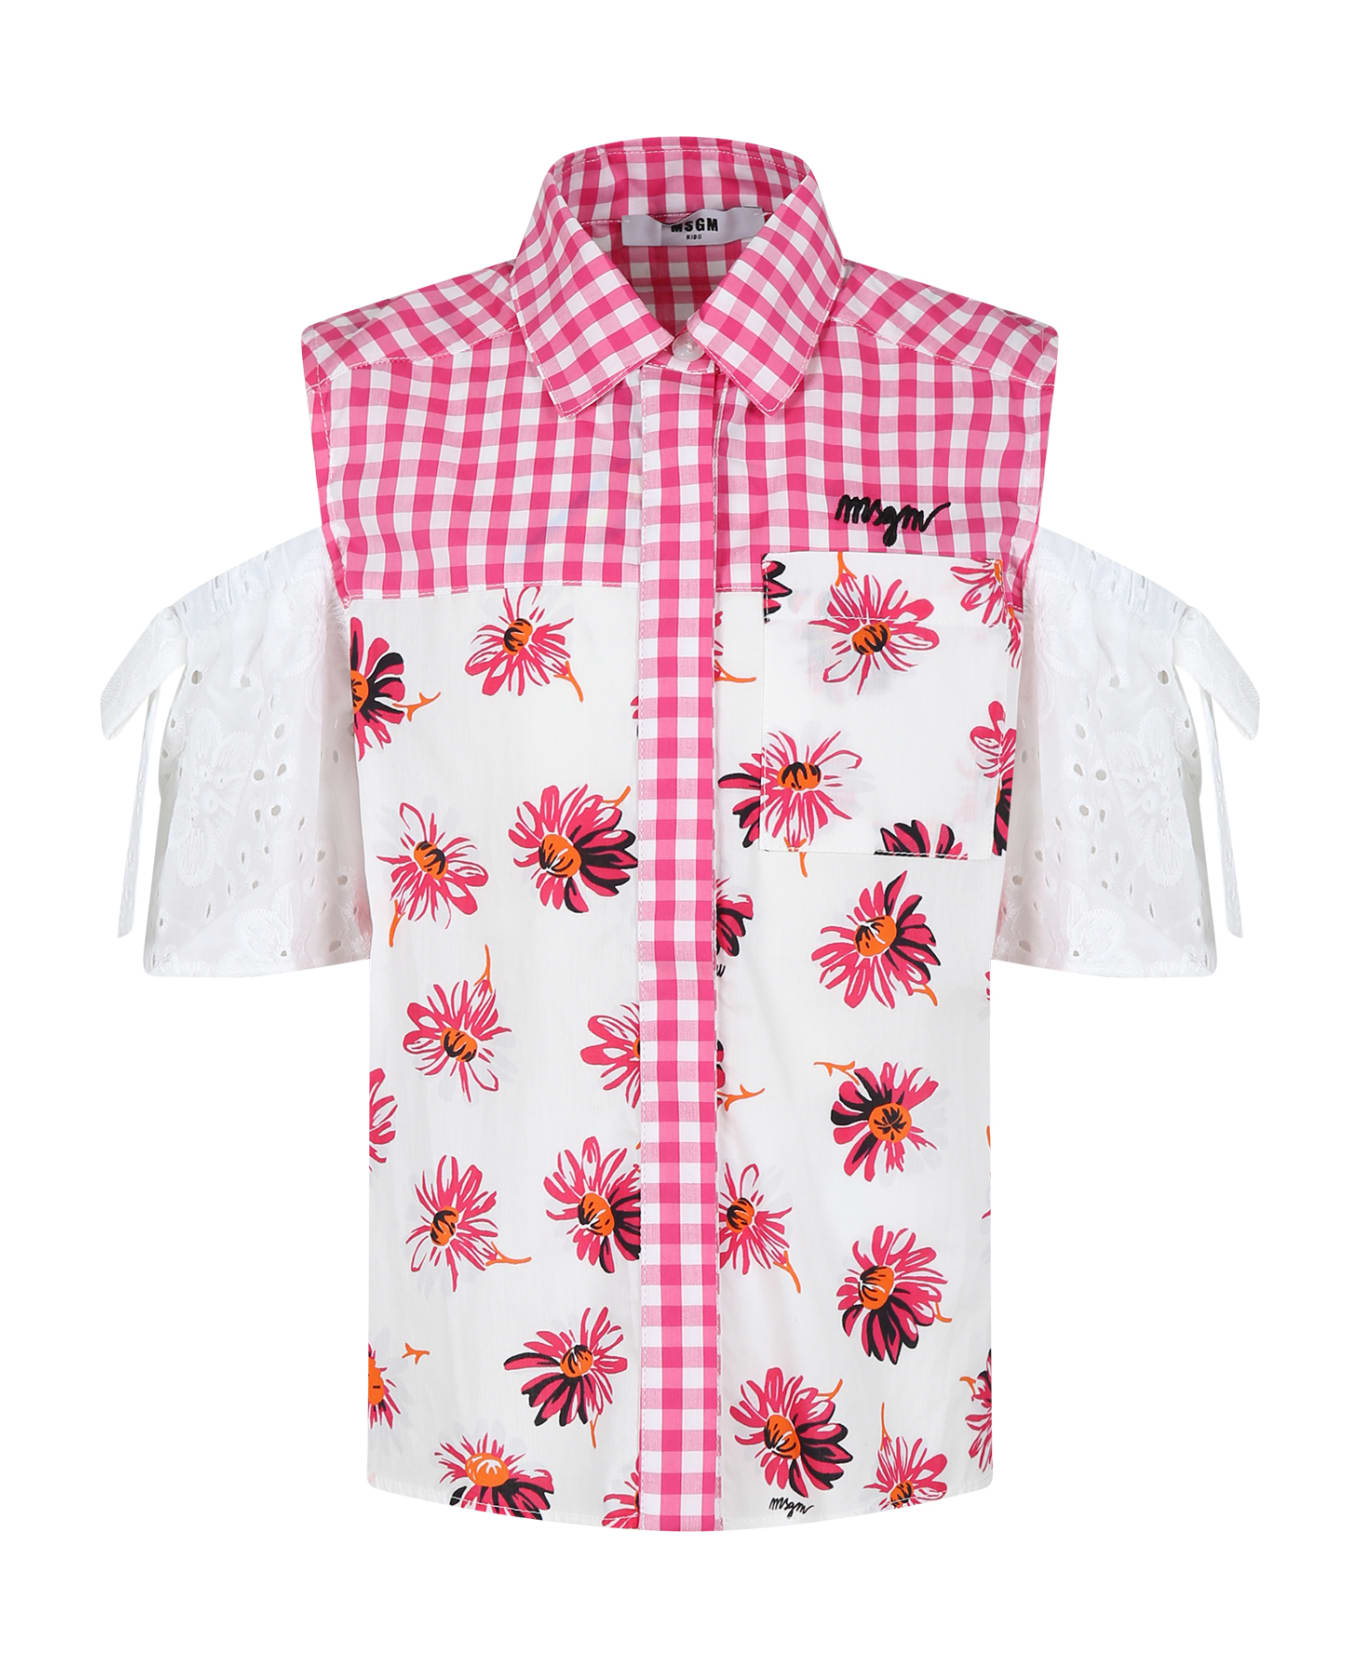 MSGM White Shirt For Girl With Daisy Print - White シャツ